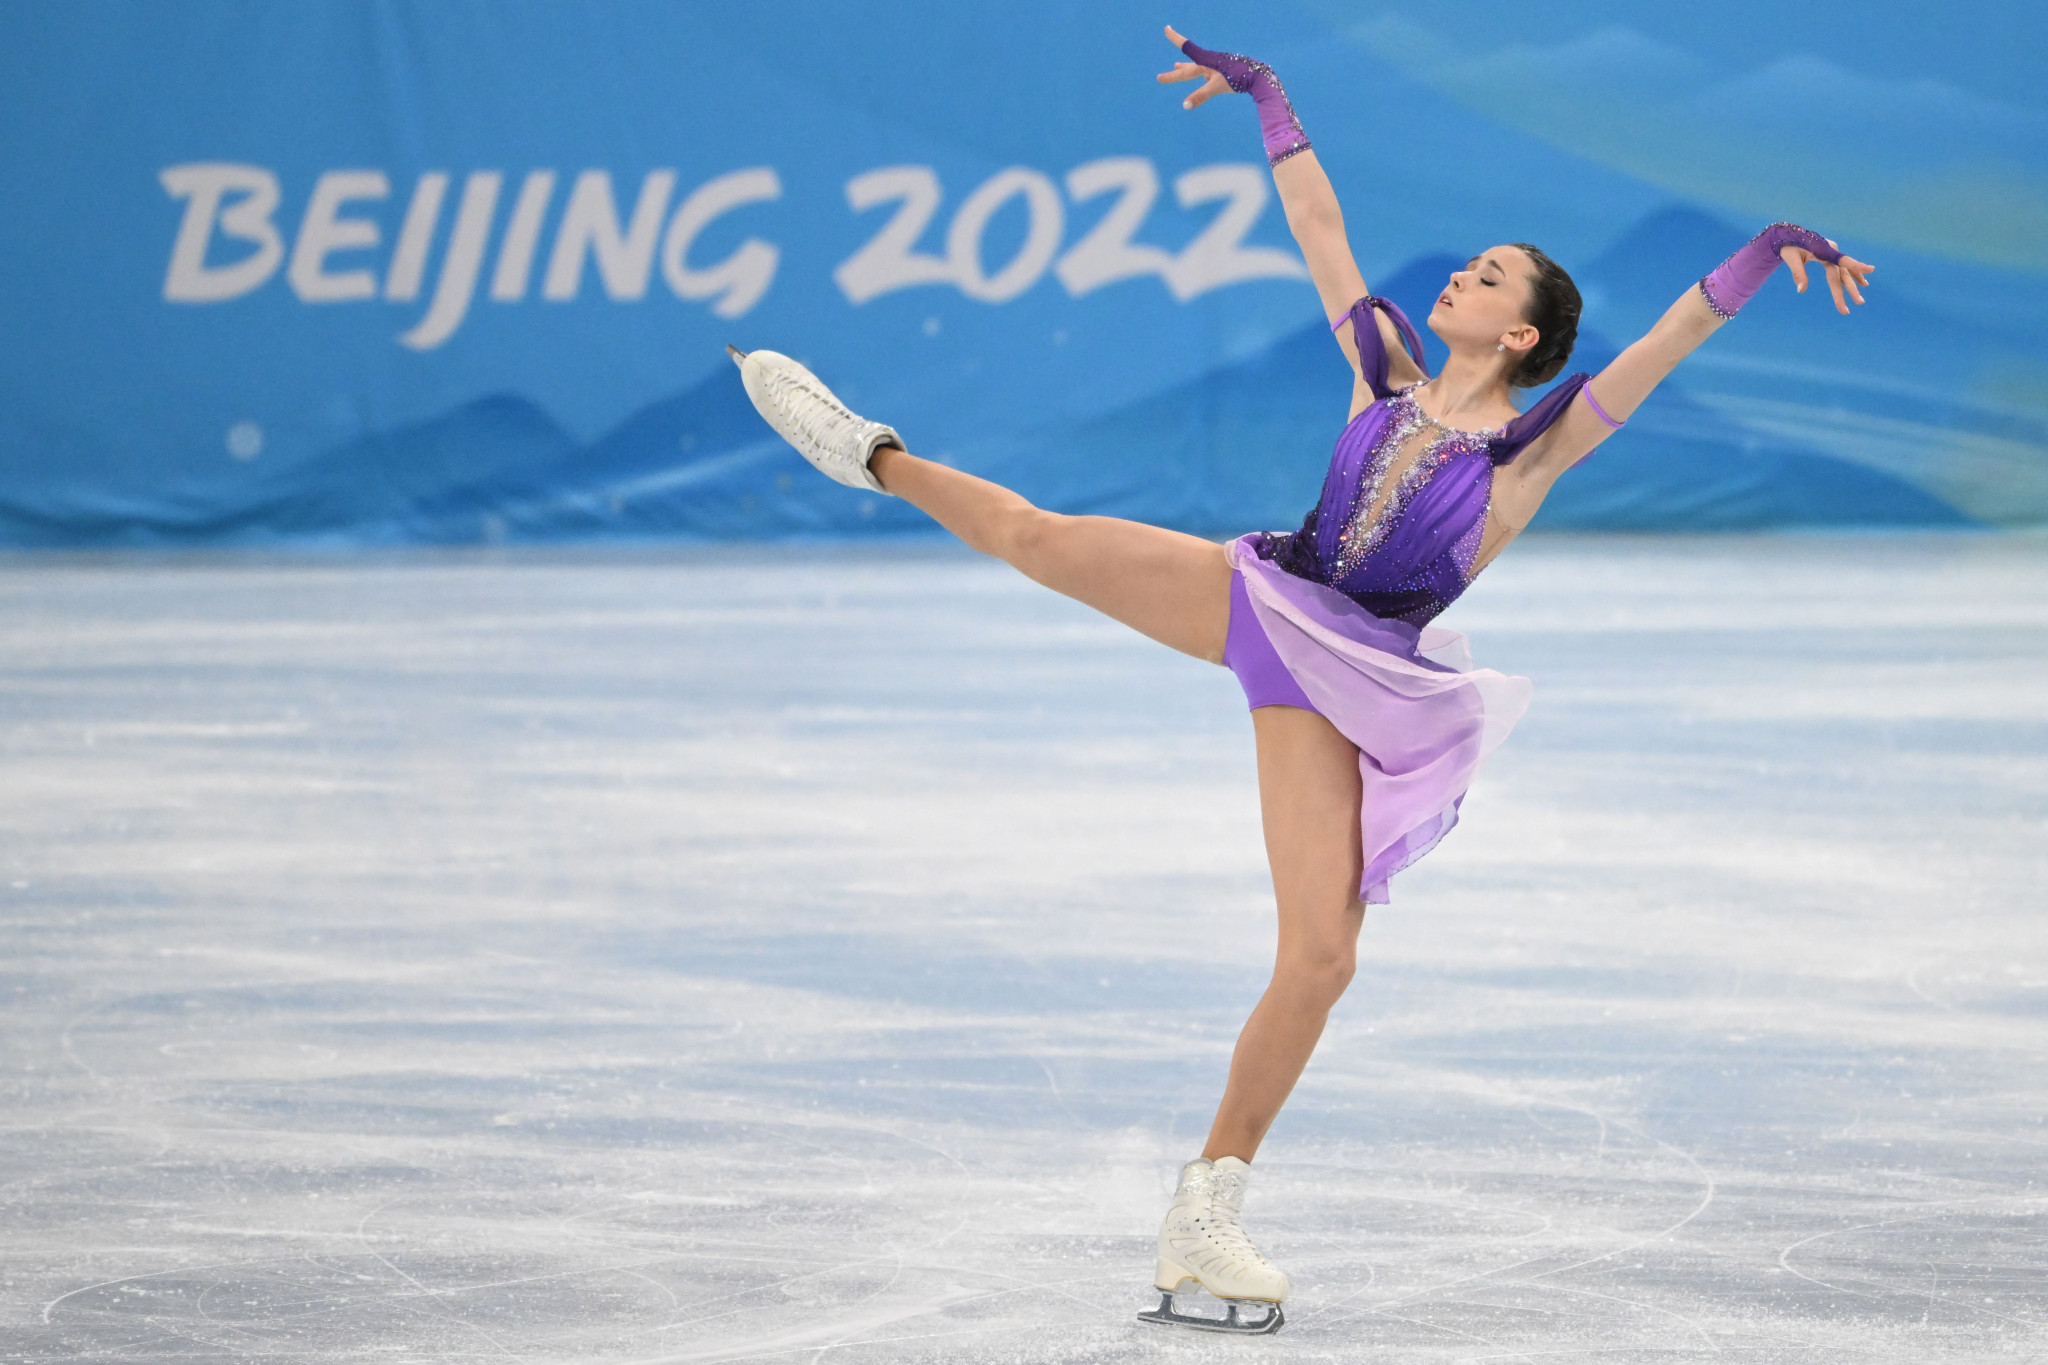 The RUSADA tribunal found Kamila Valieva should be stripped of her women's singles gold at the 2021 Russian Championships, but the ROC would be allowed to keep its Beijing 2022 team gold subject to a CAS appeal ©Getty Images